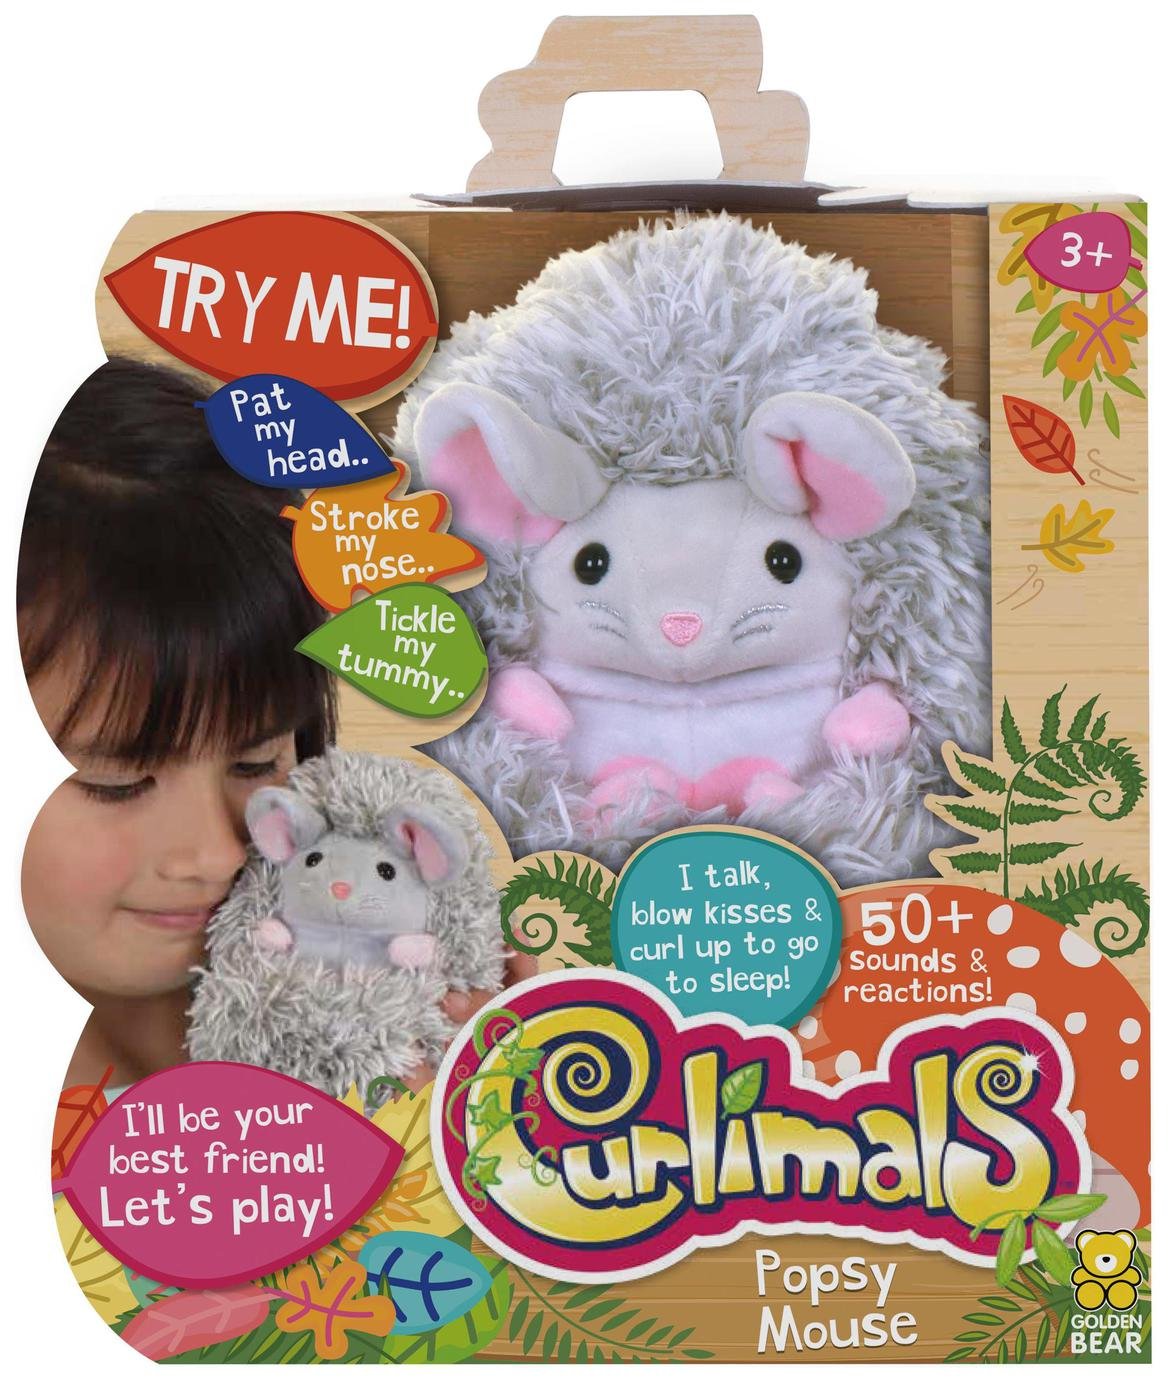 Curlimals Popsy The Mouse Plush review